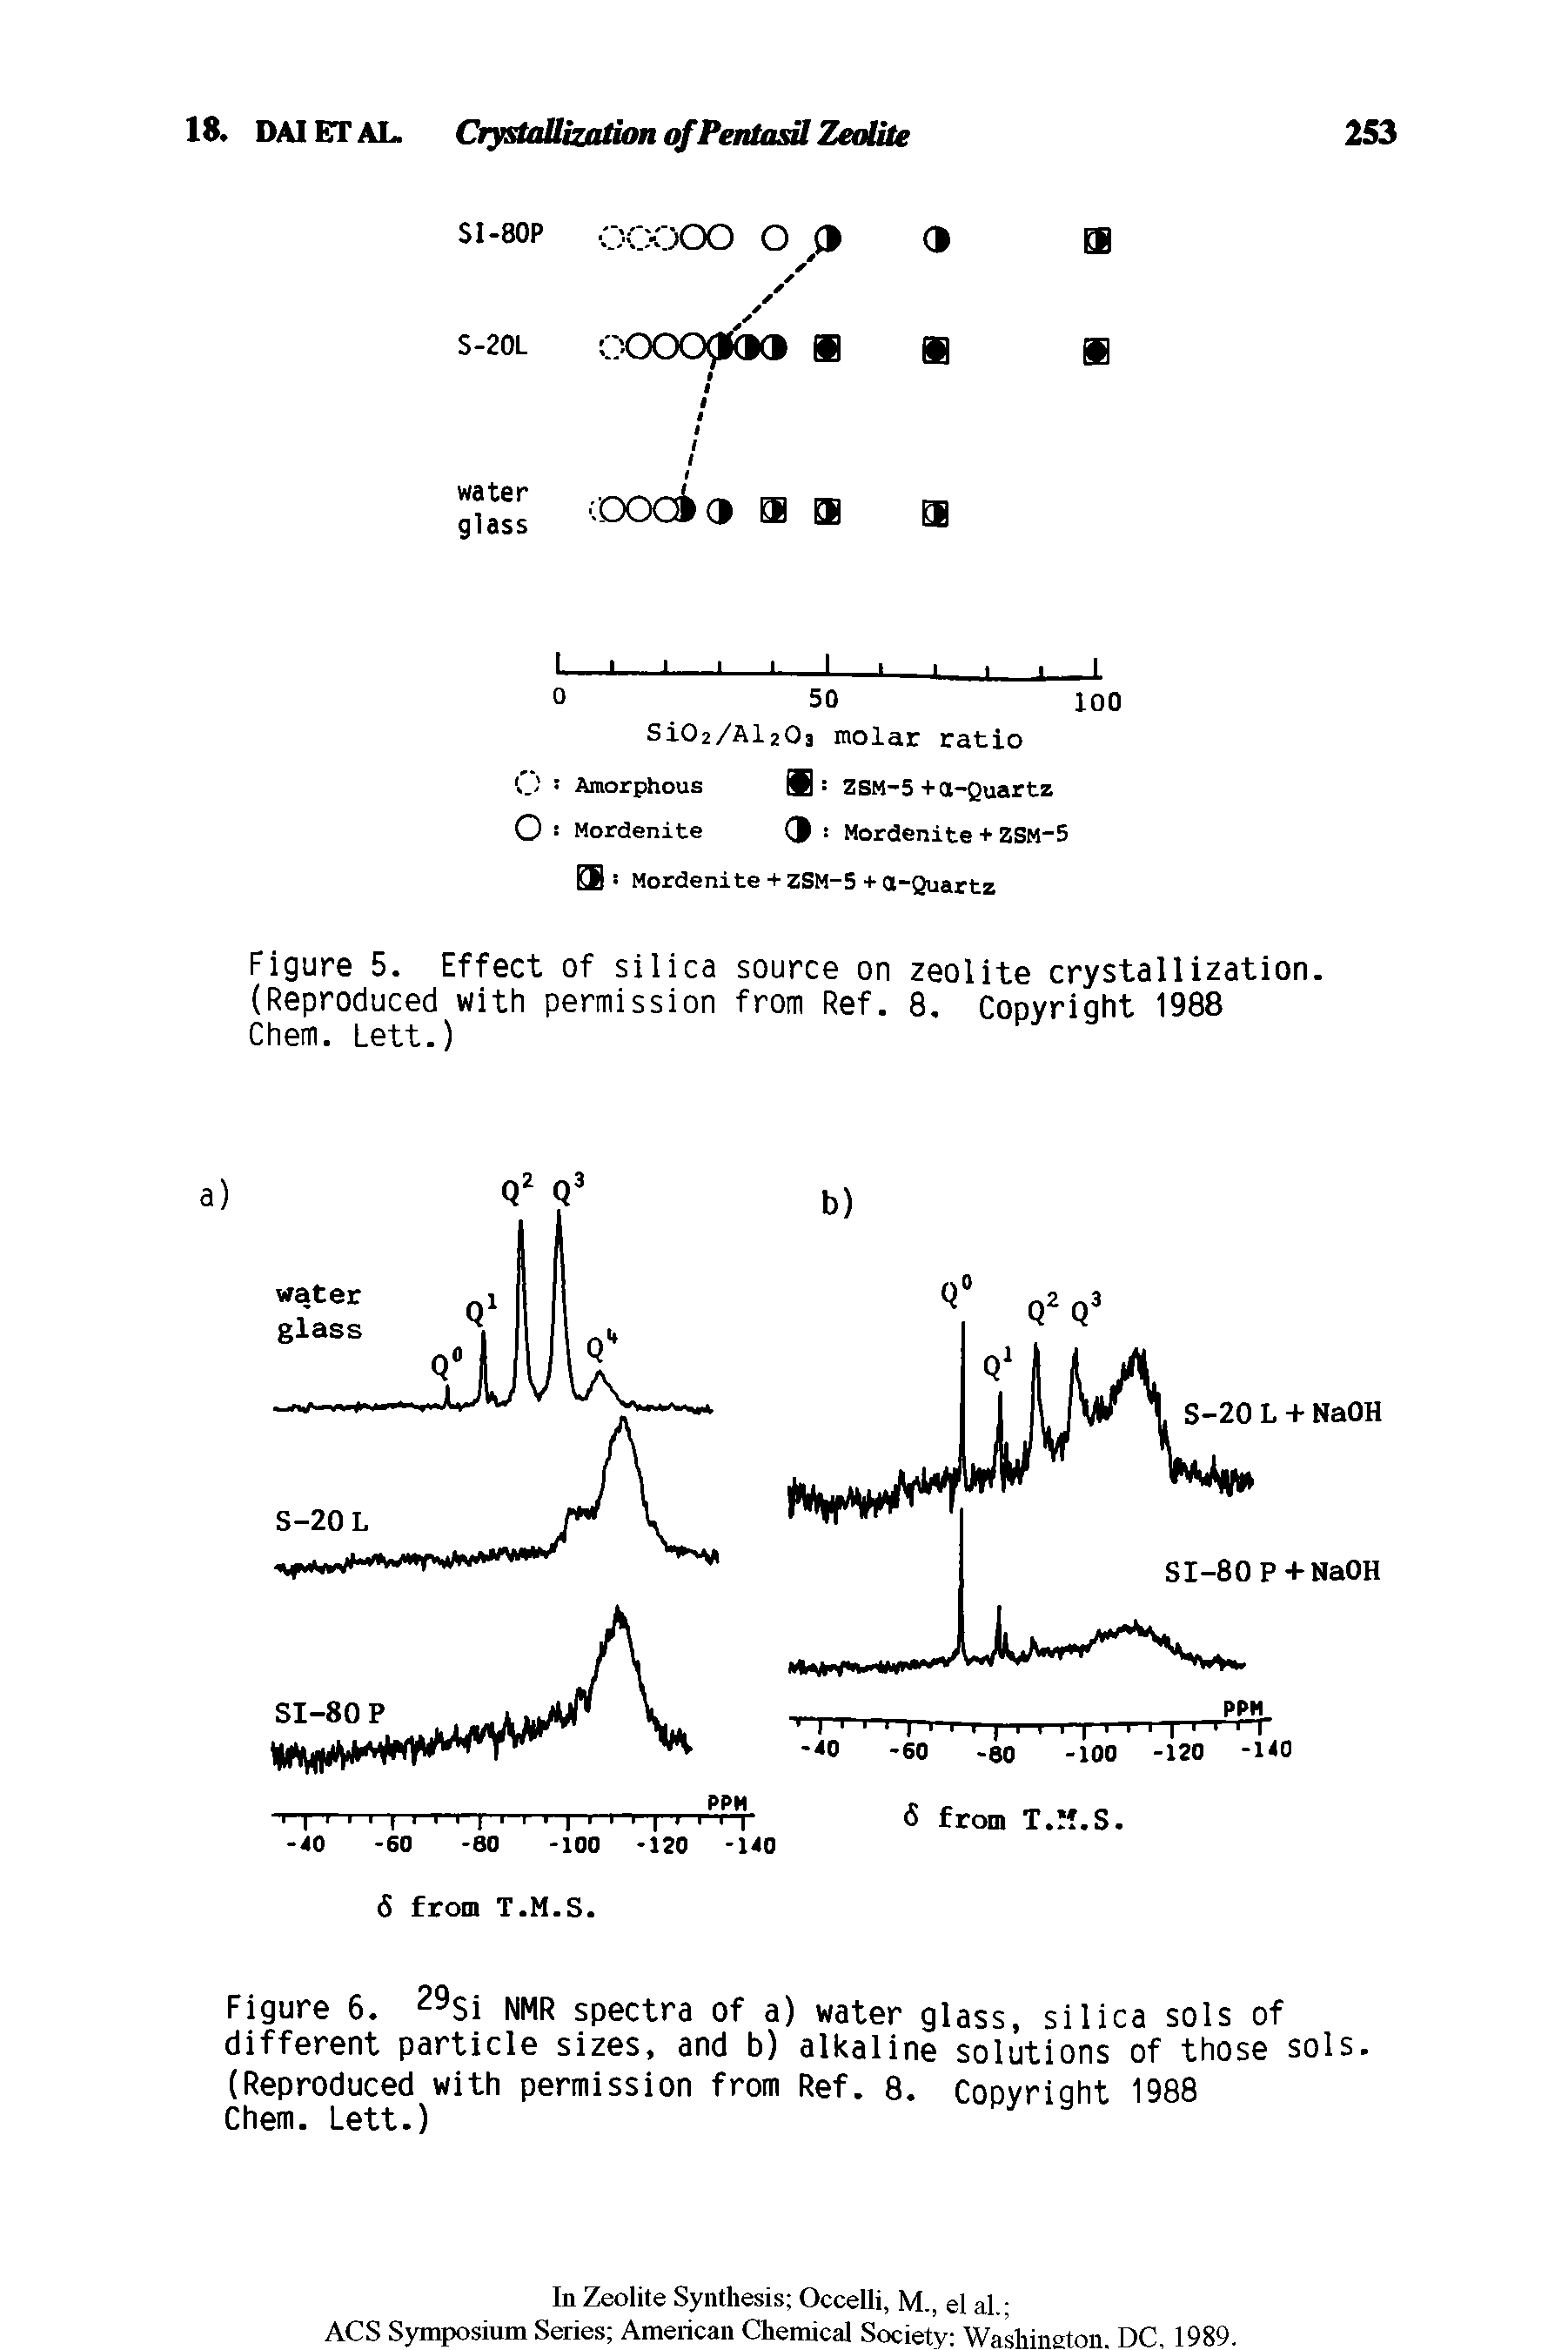 Figure 6. 29Si NMR spectra of a) water glass, silica sols of different particle sizes, and b) alkaline solutions of those sols. (Reproduced with permission from Ref. 8. Copyright 1988 Chem. Lett.)...